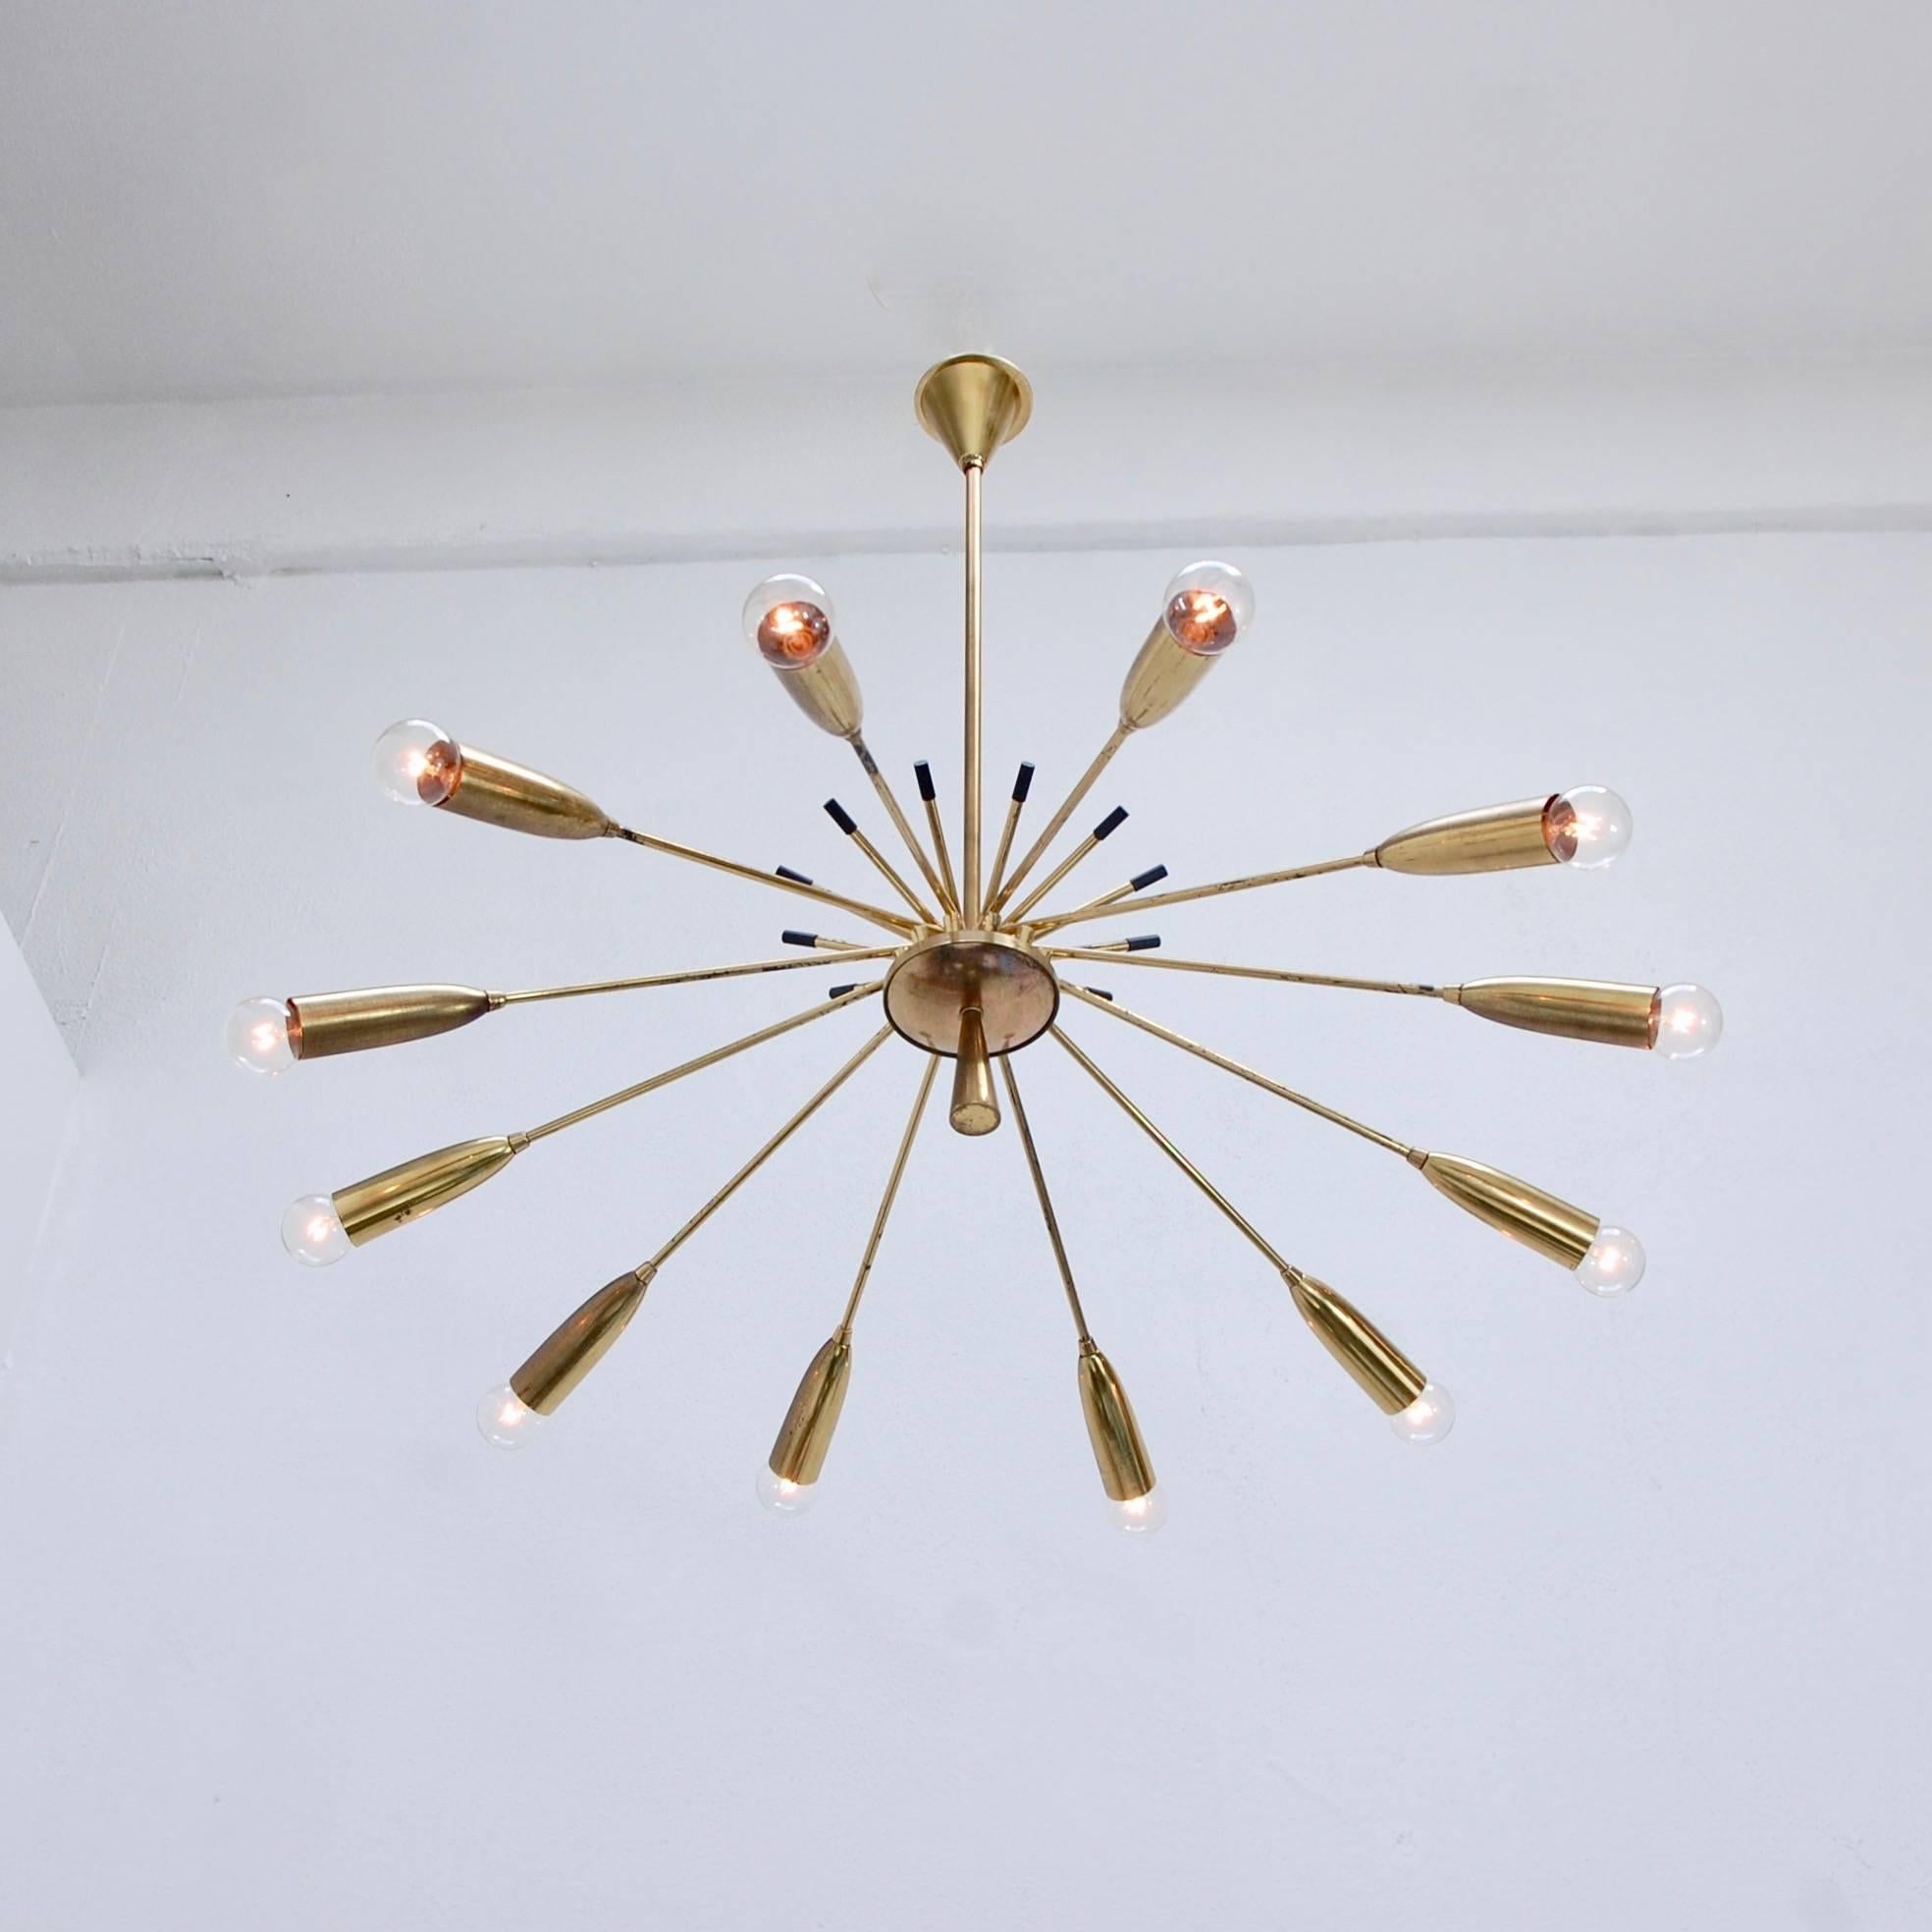 Stunning twelve-arm Italian modernist chandelier light fixture from the 1950s. Original brass finish. Rewired for use in the US. Candelabra based E12 sockets.
Measures: Fixture height 9”
Diameter 37”
OAD 32”.
   